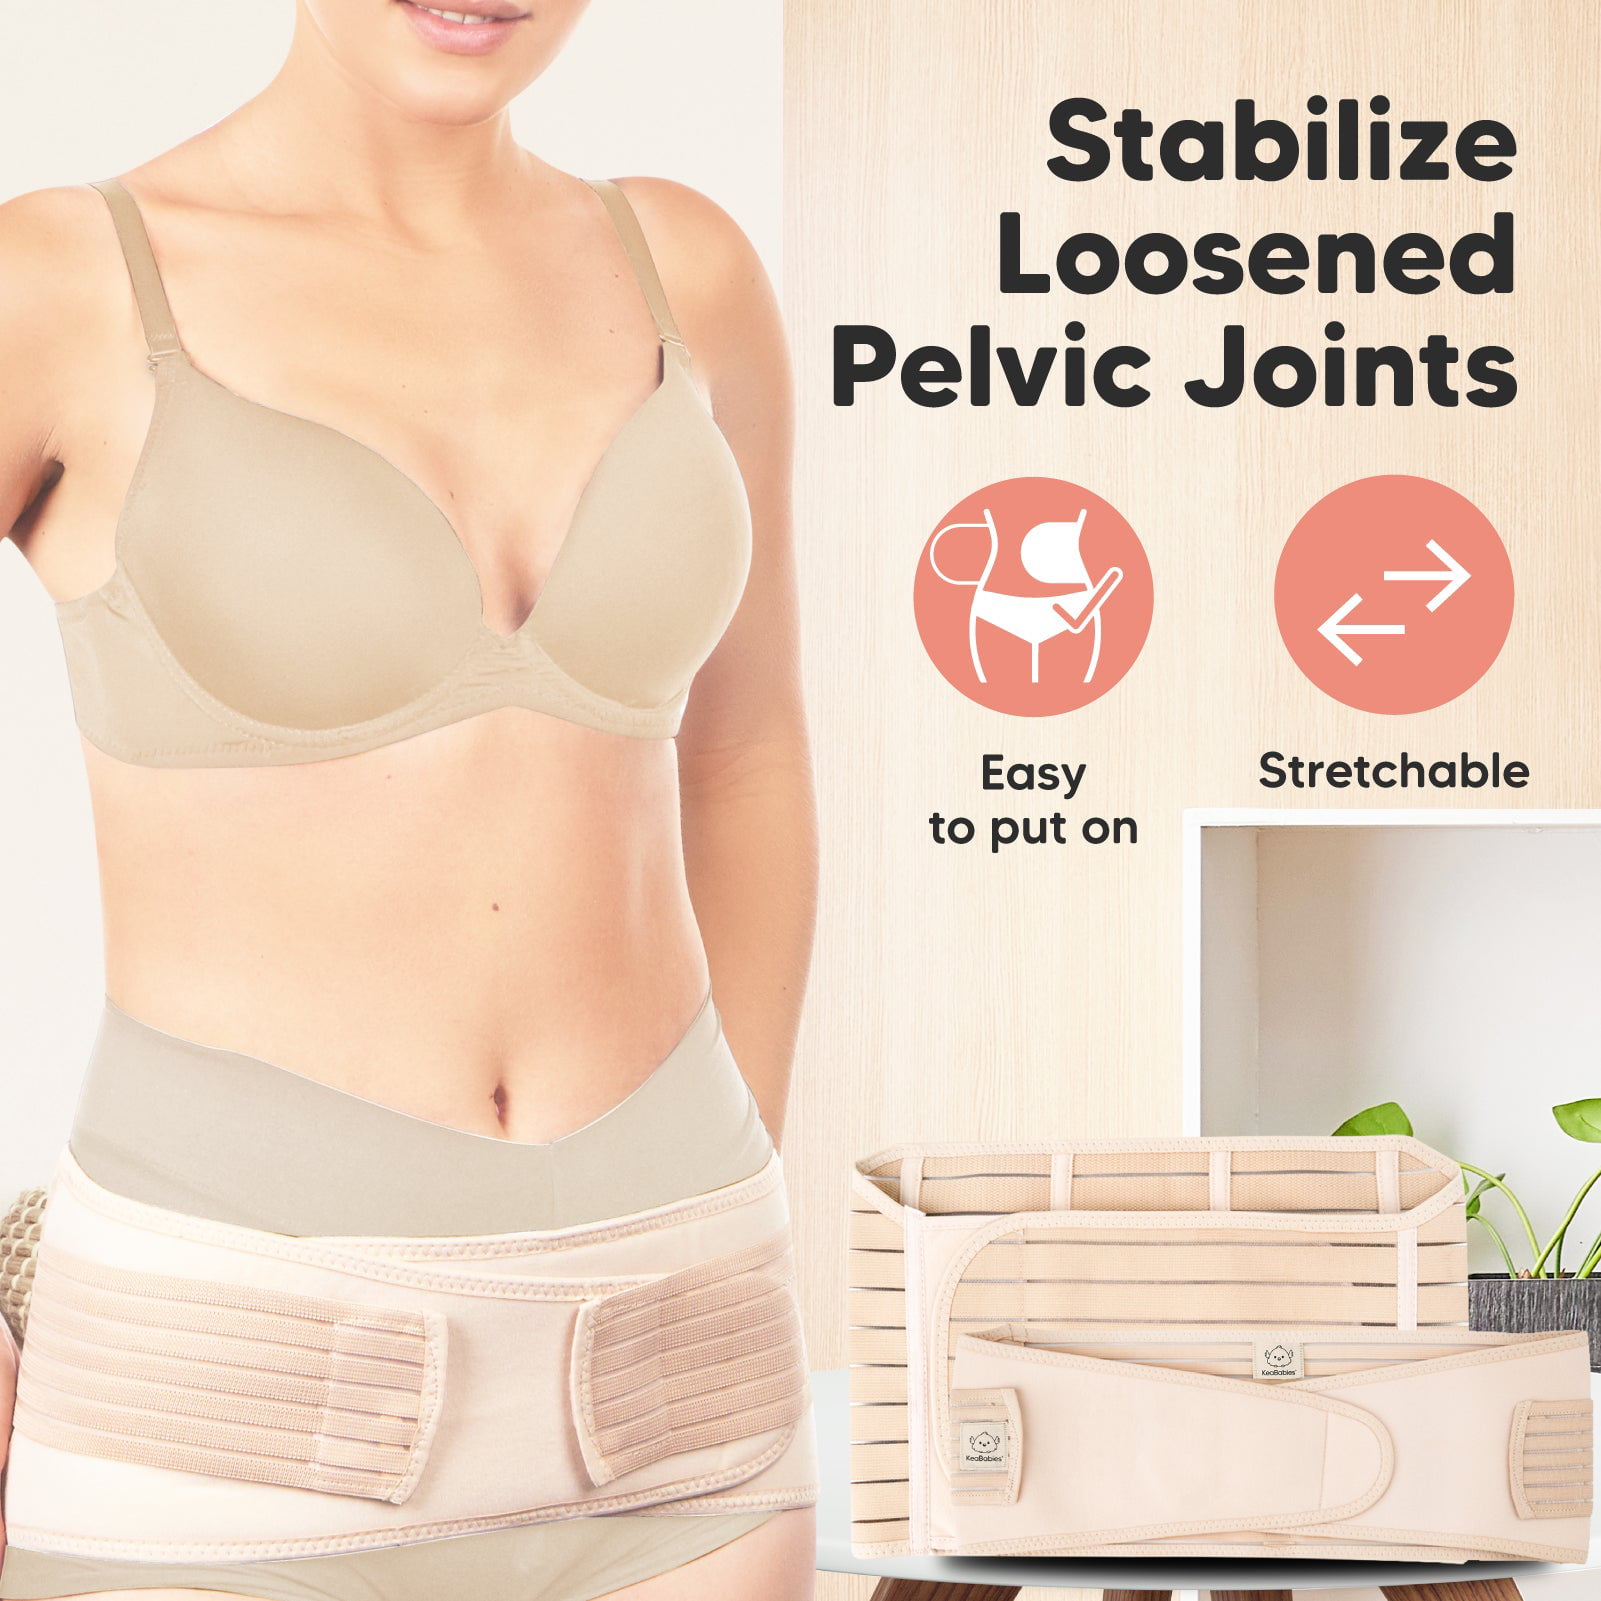 *NEW* 3 in 1 PostPartum Recovery Shaper